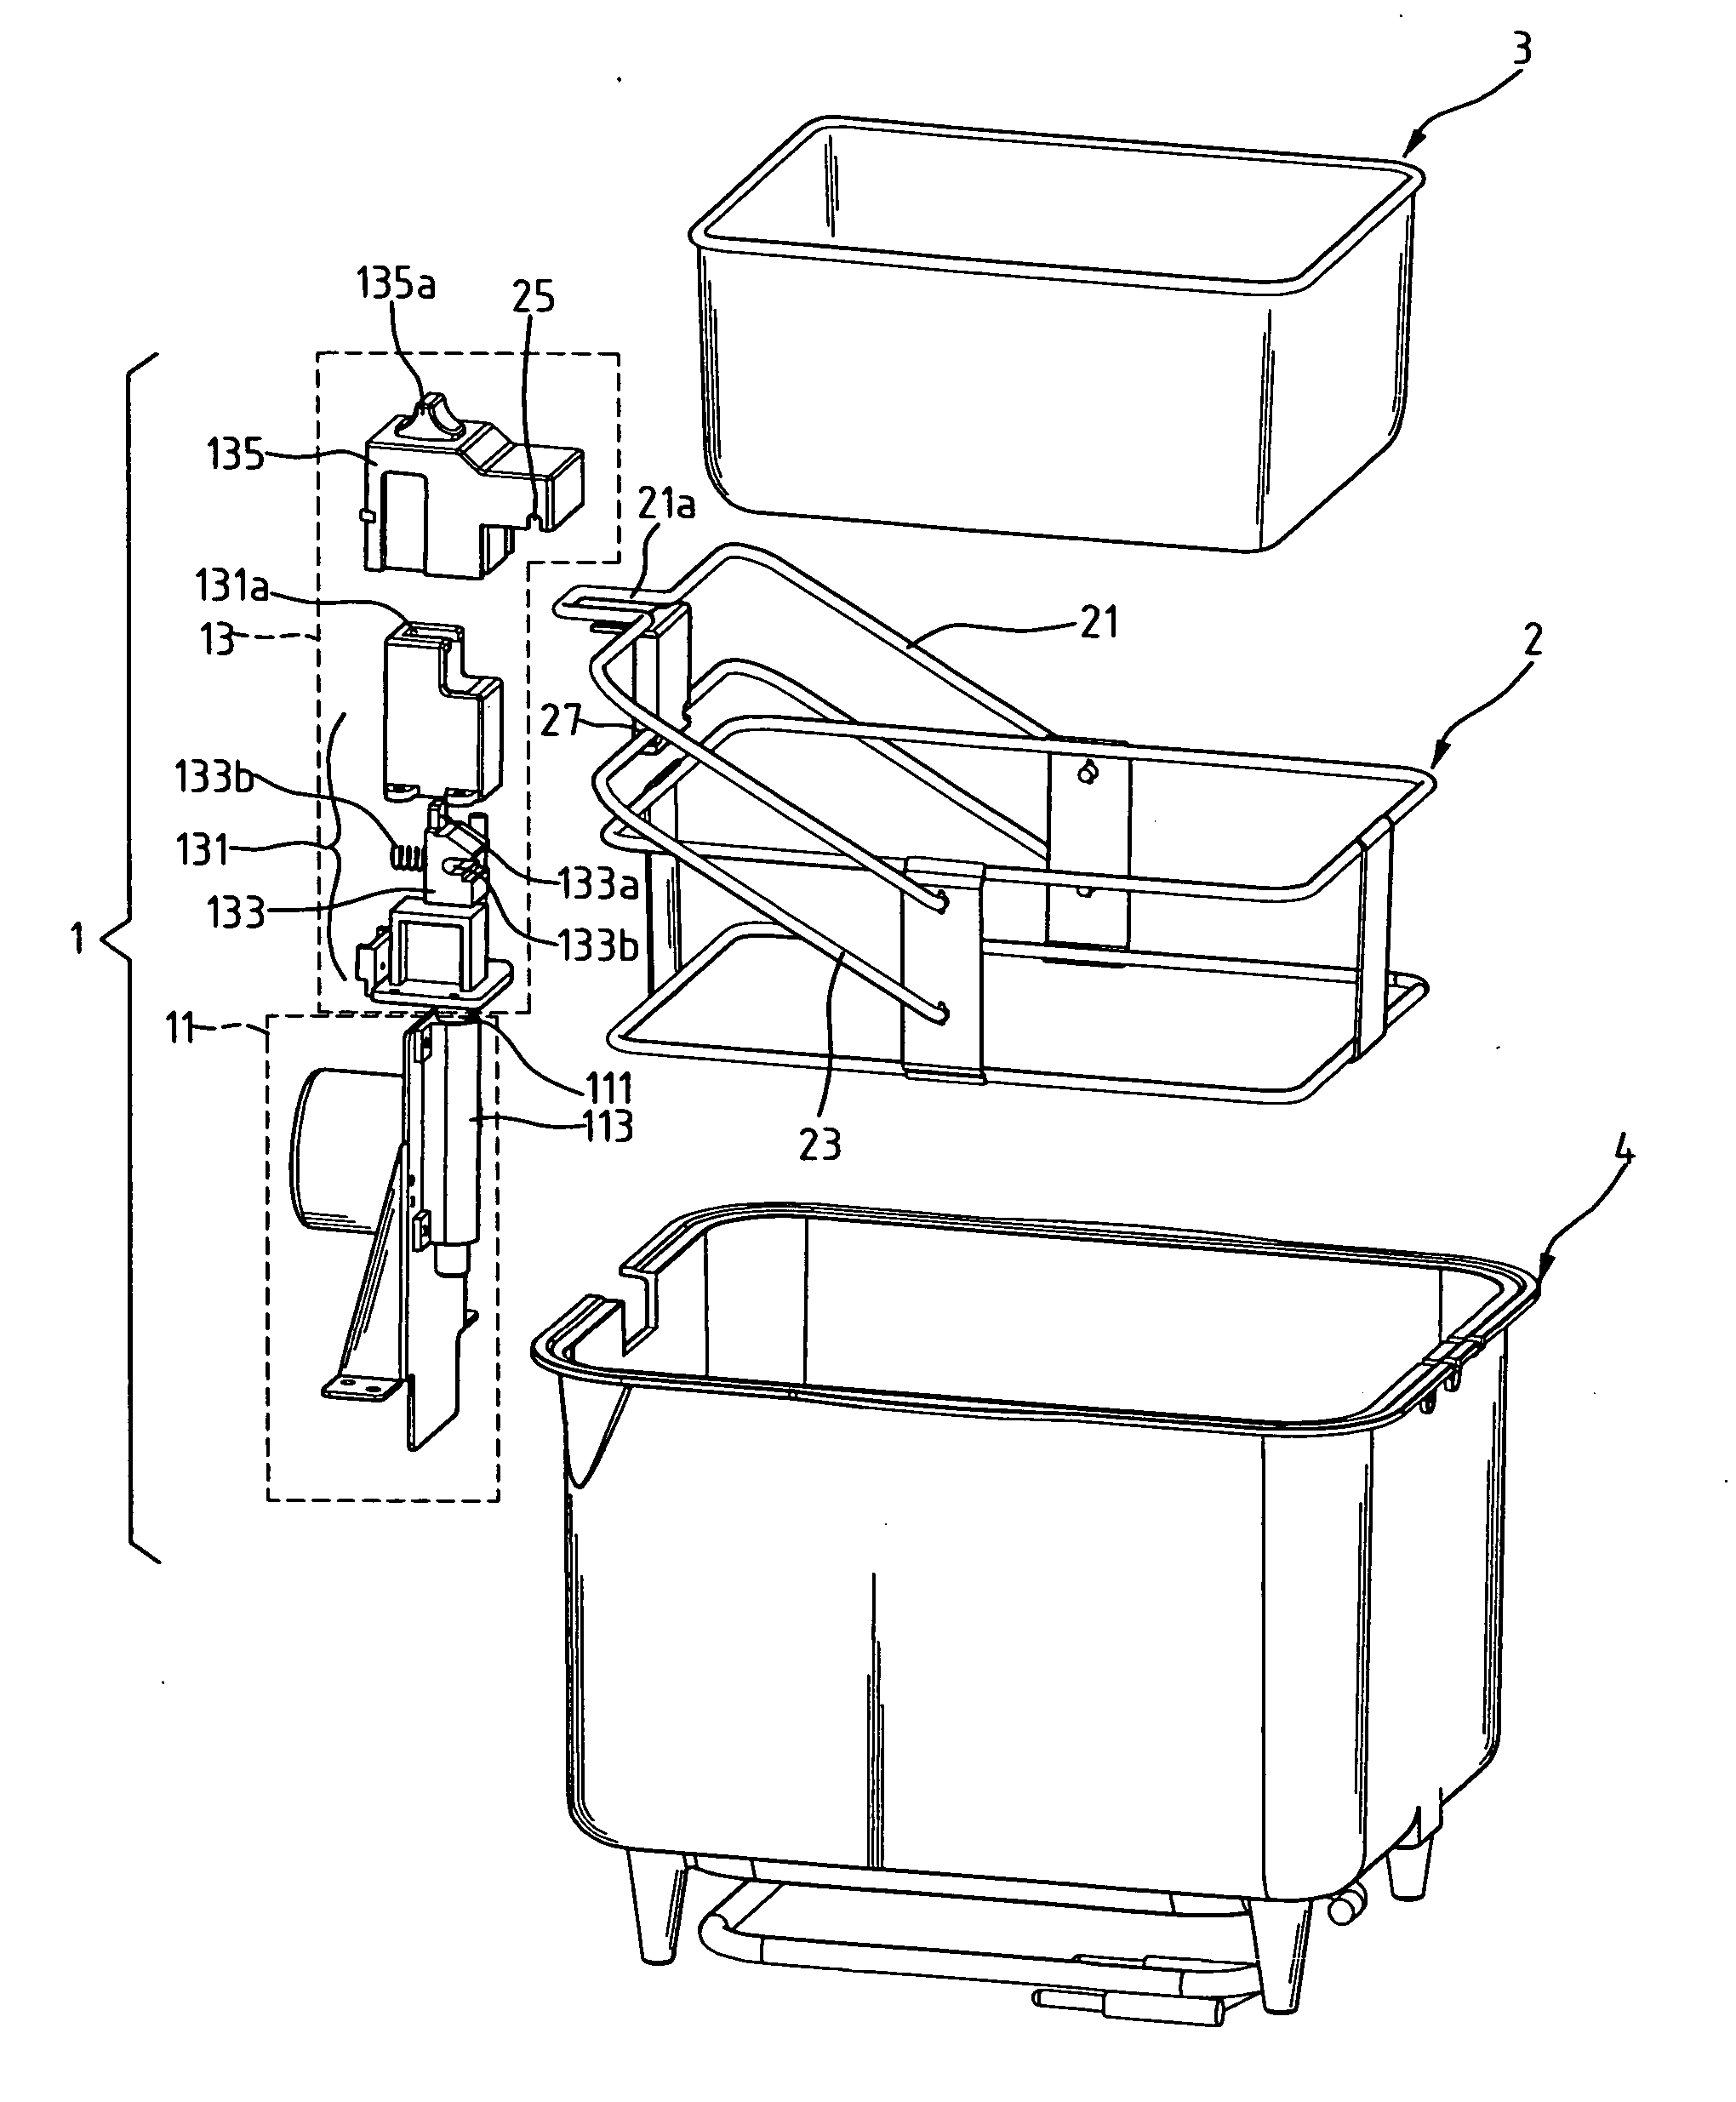 Control mechanism for deep fryer to control elevation of basket received in the deep fryer